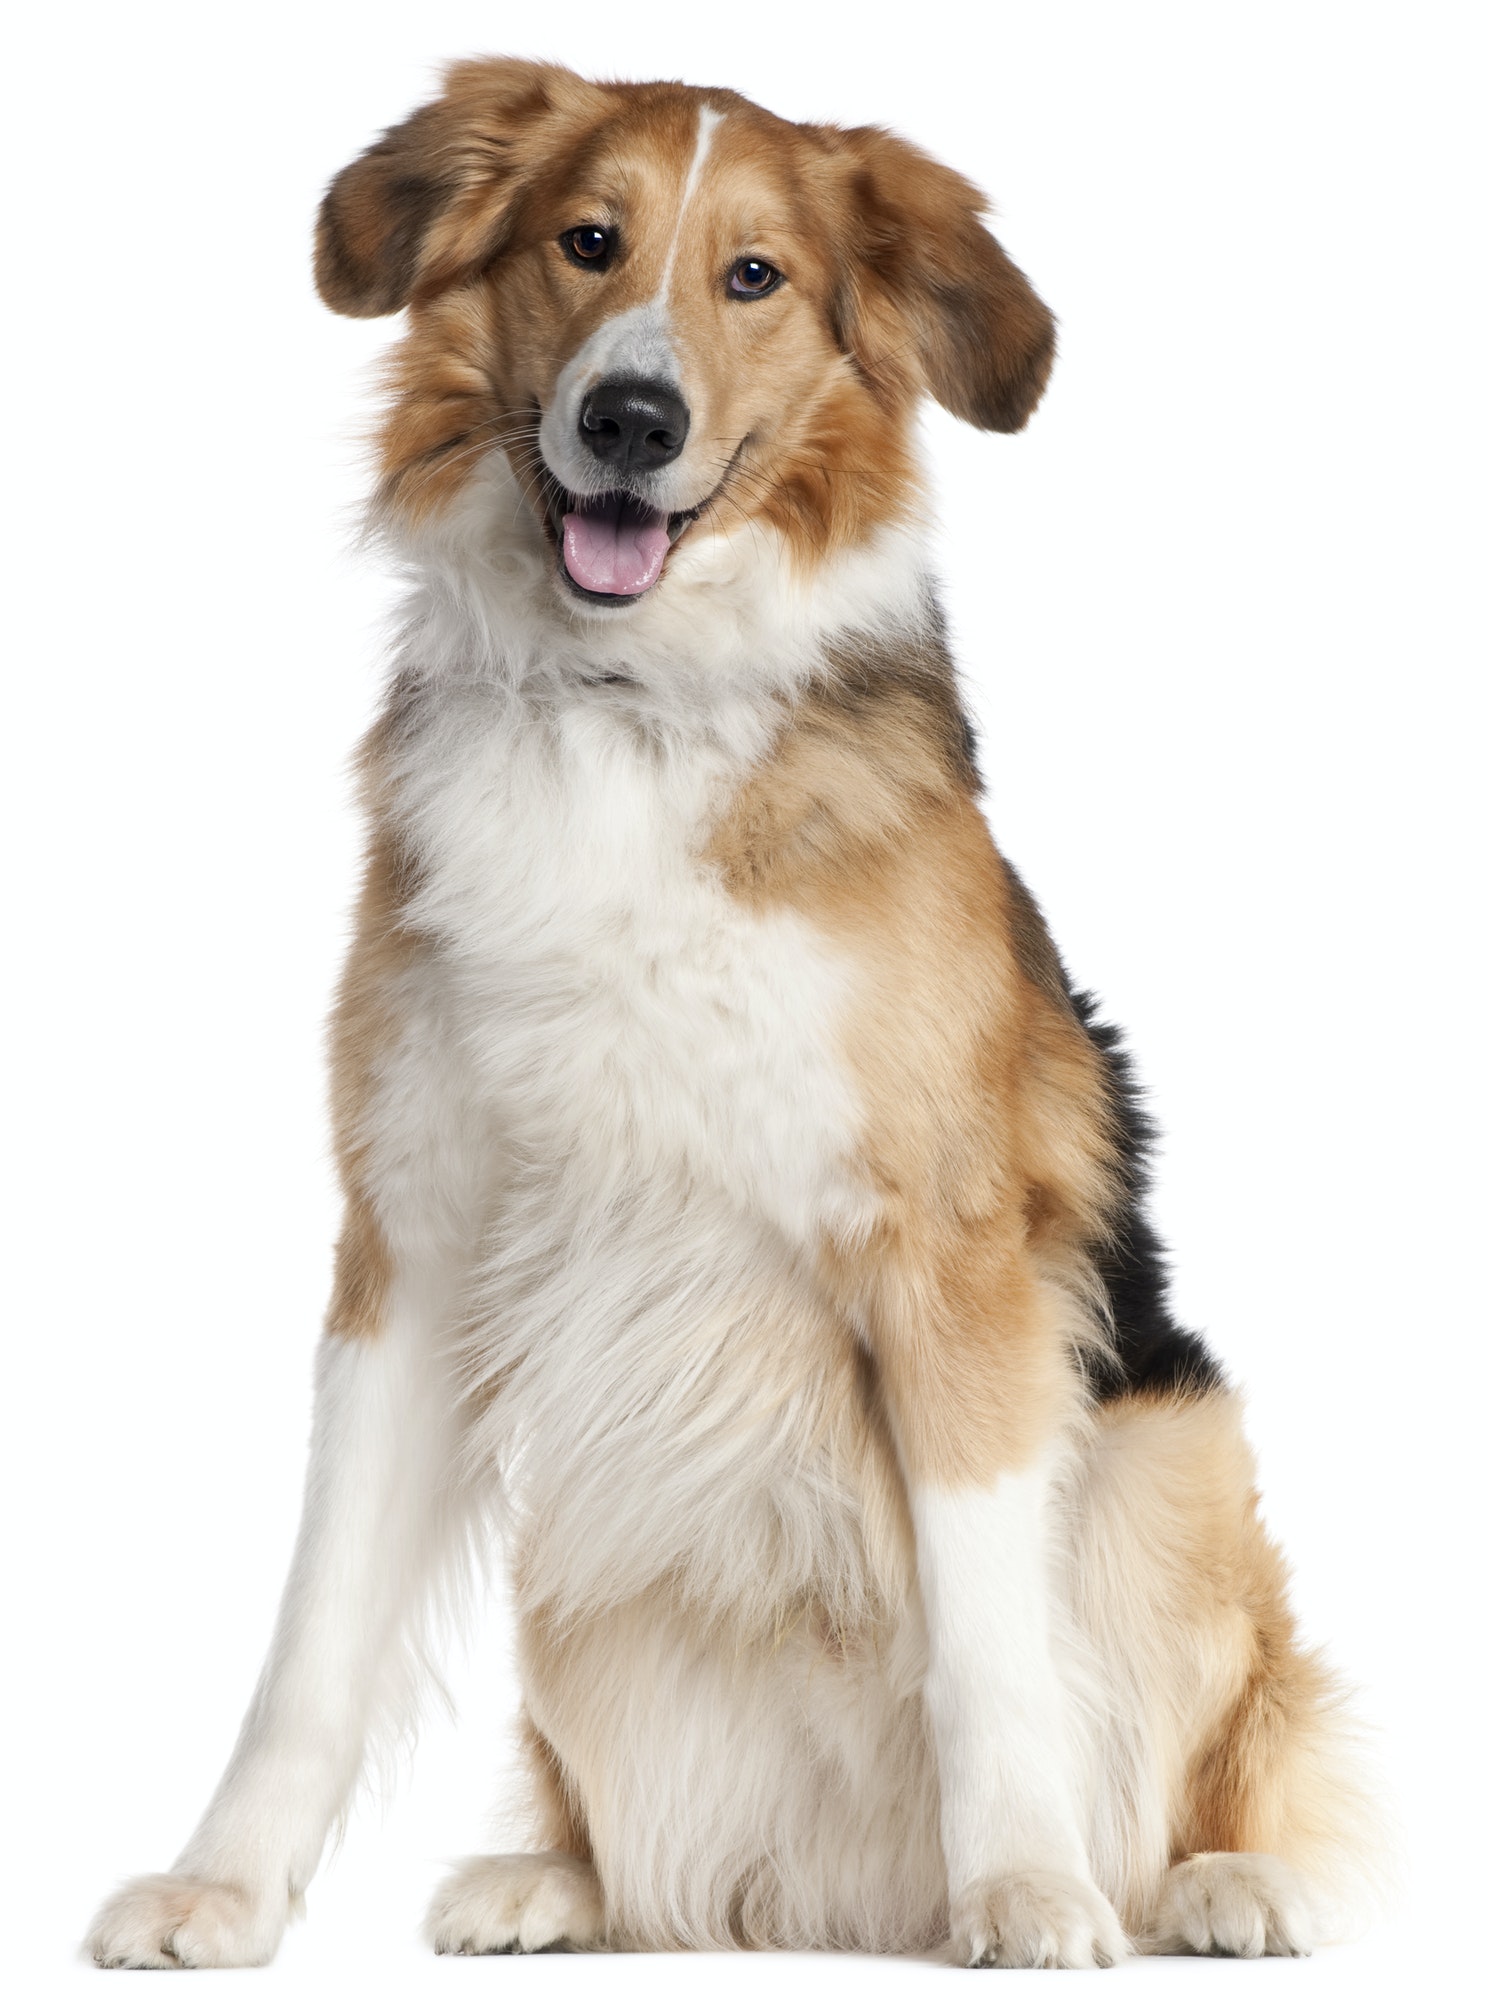 mixed breed dog and a half years old sitting in front of white background.jpg